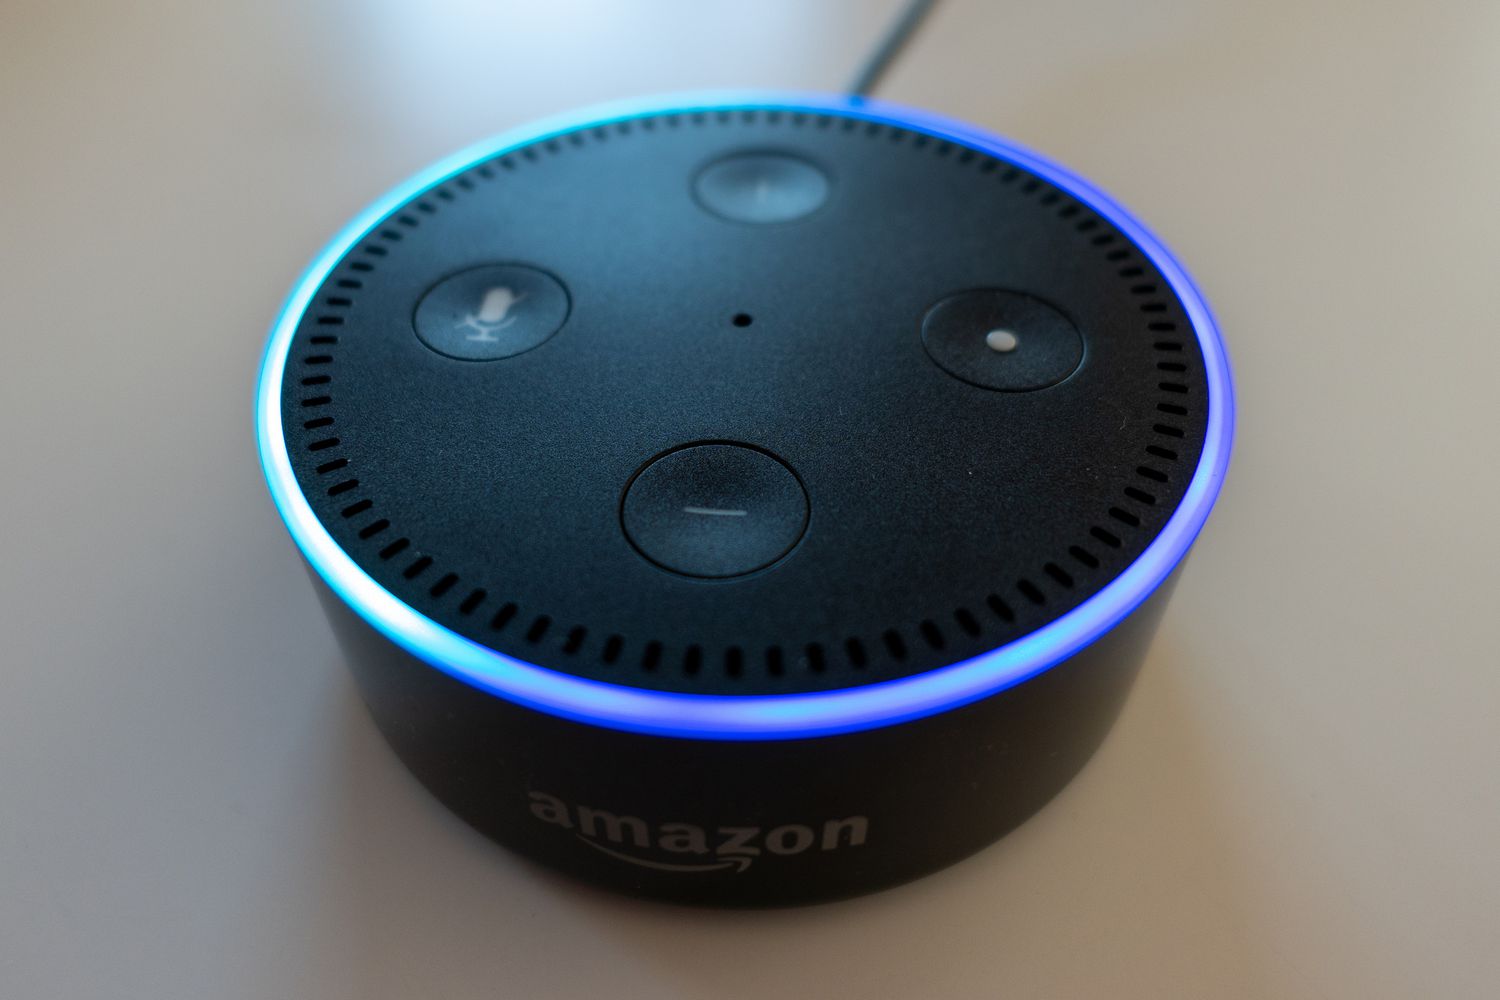 What Does A Blue Ring With A Circling White Light Mean On The Amazon Echo